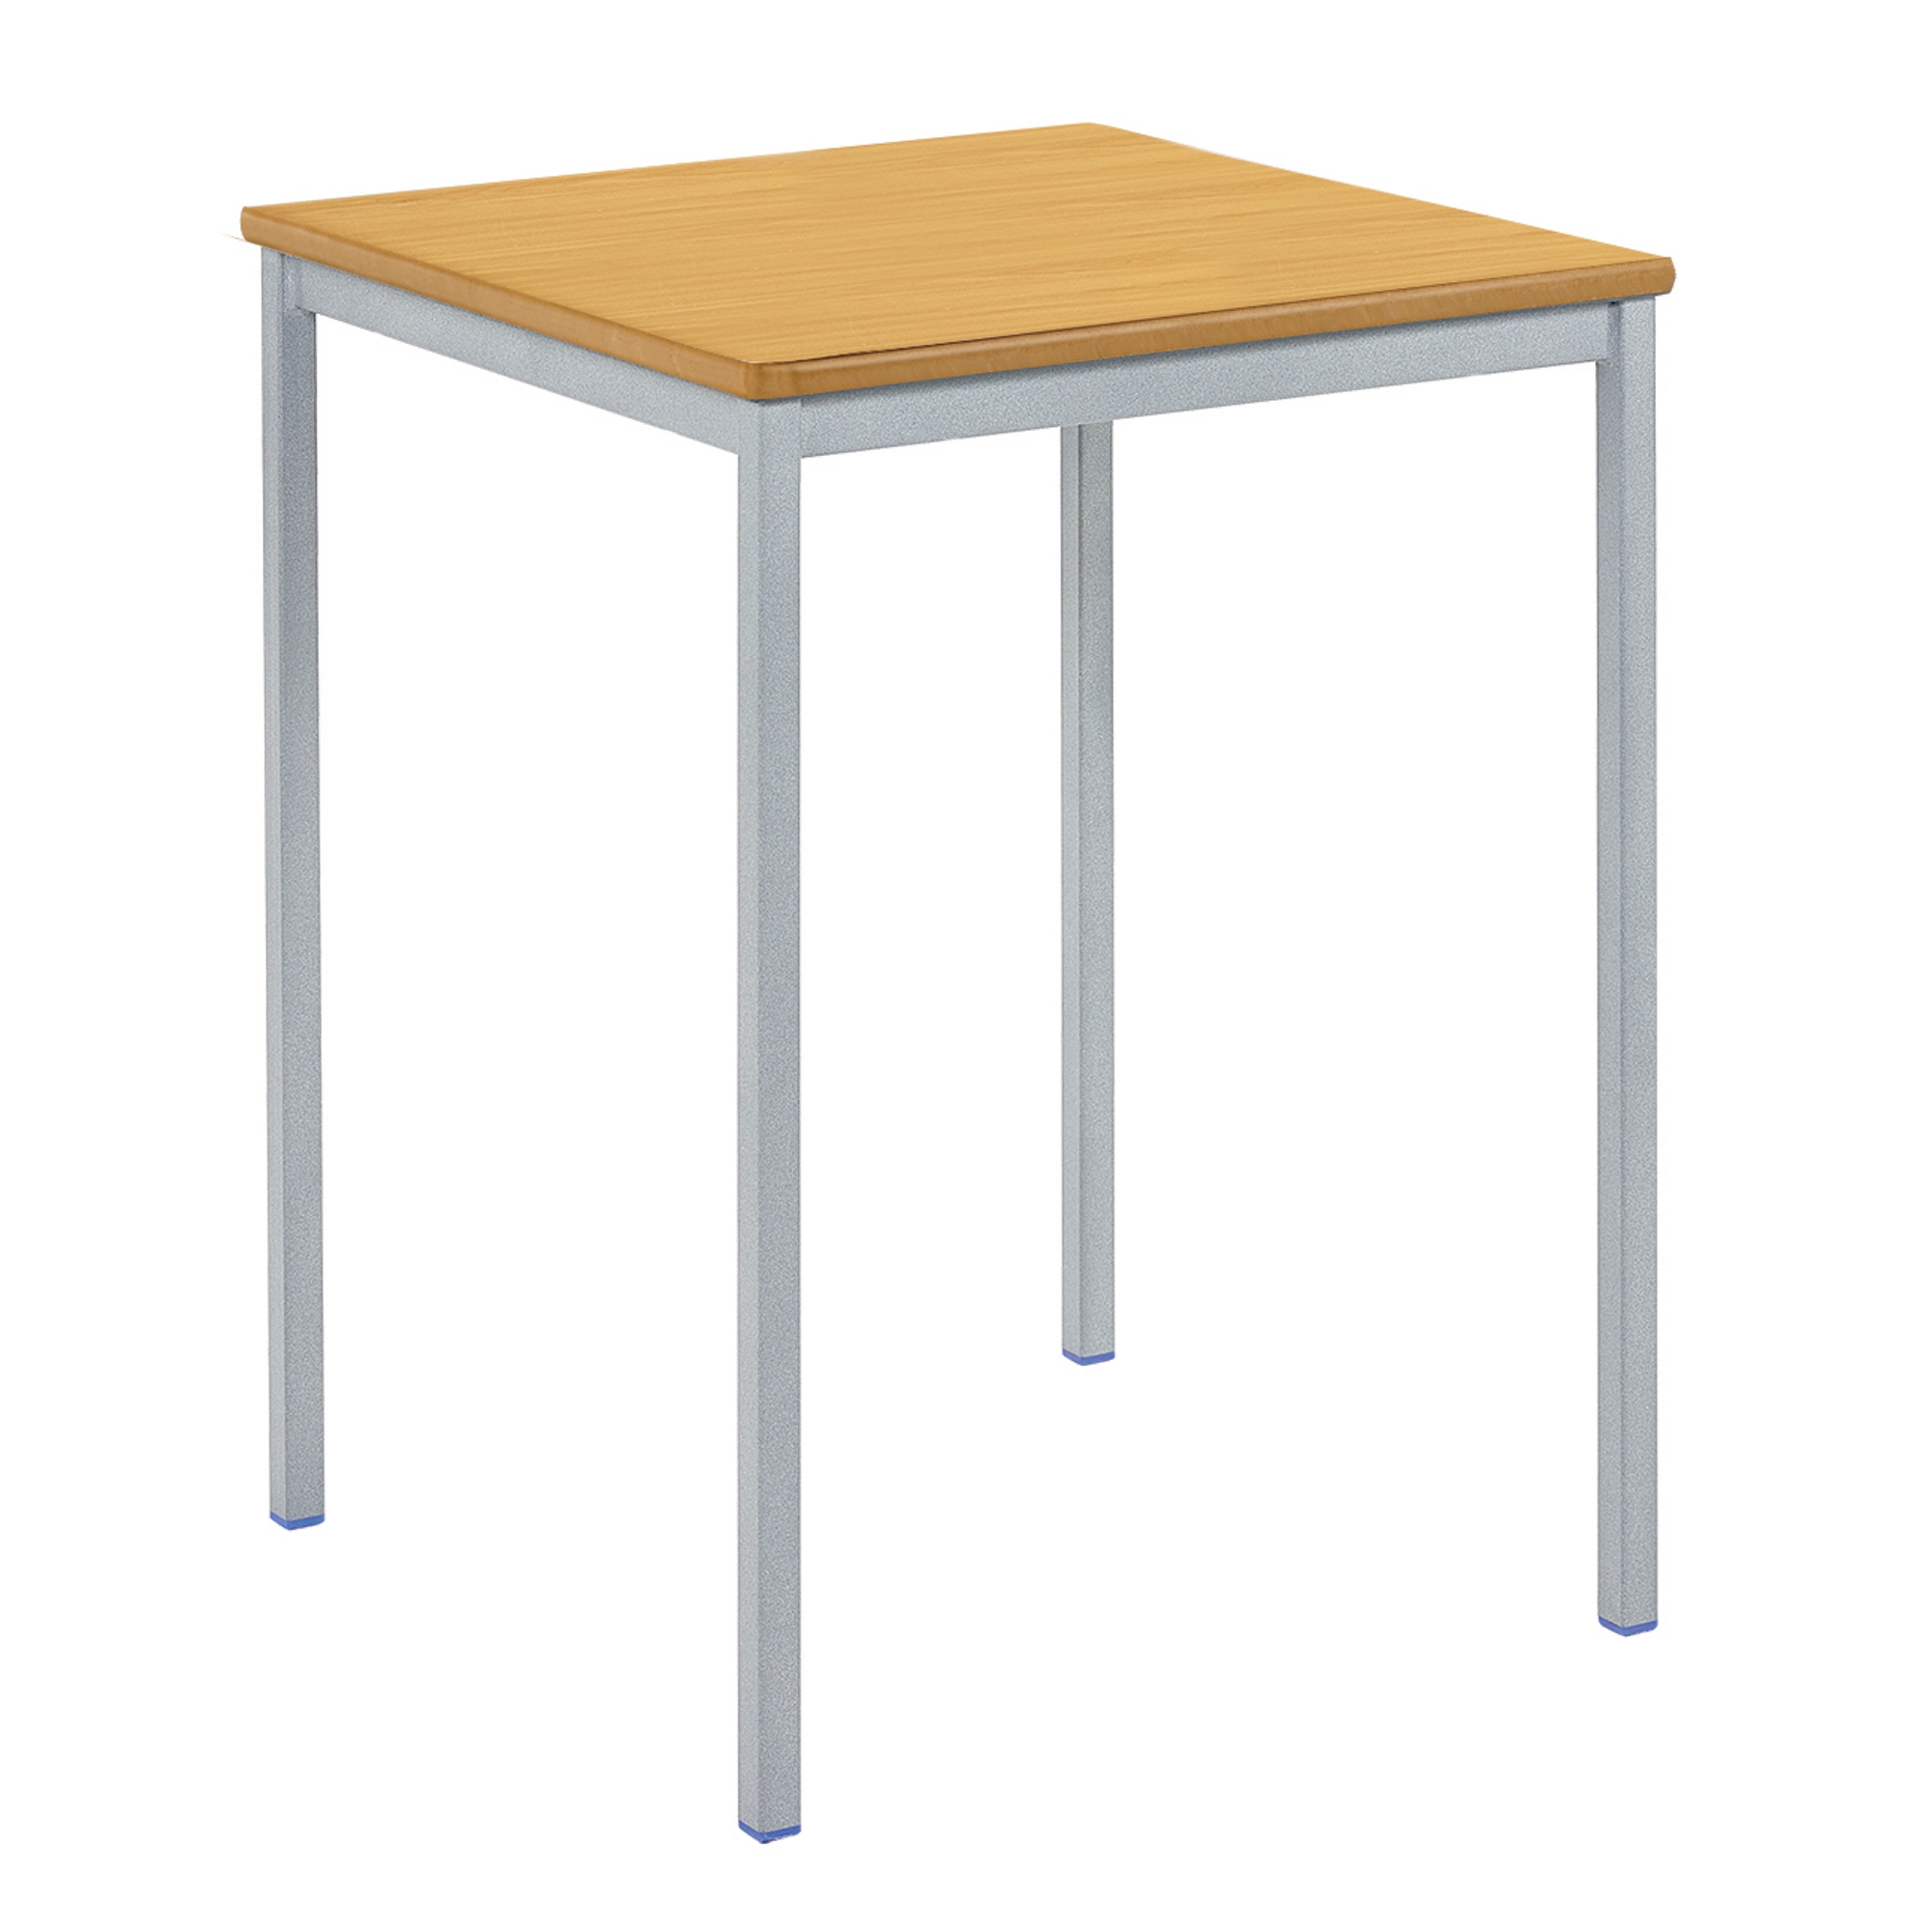 Classmates Square Fully Welded Classroom Table - 600 x 600 x 530mm - Beech